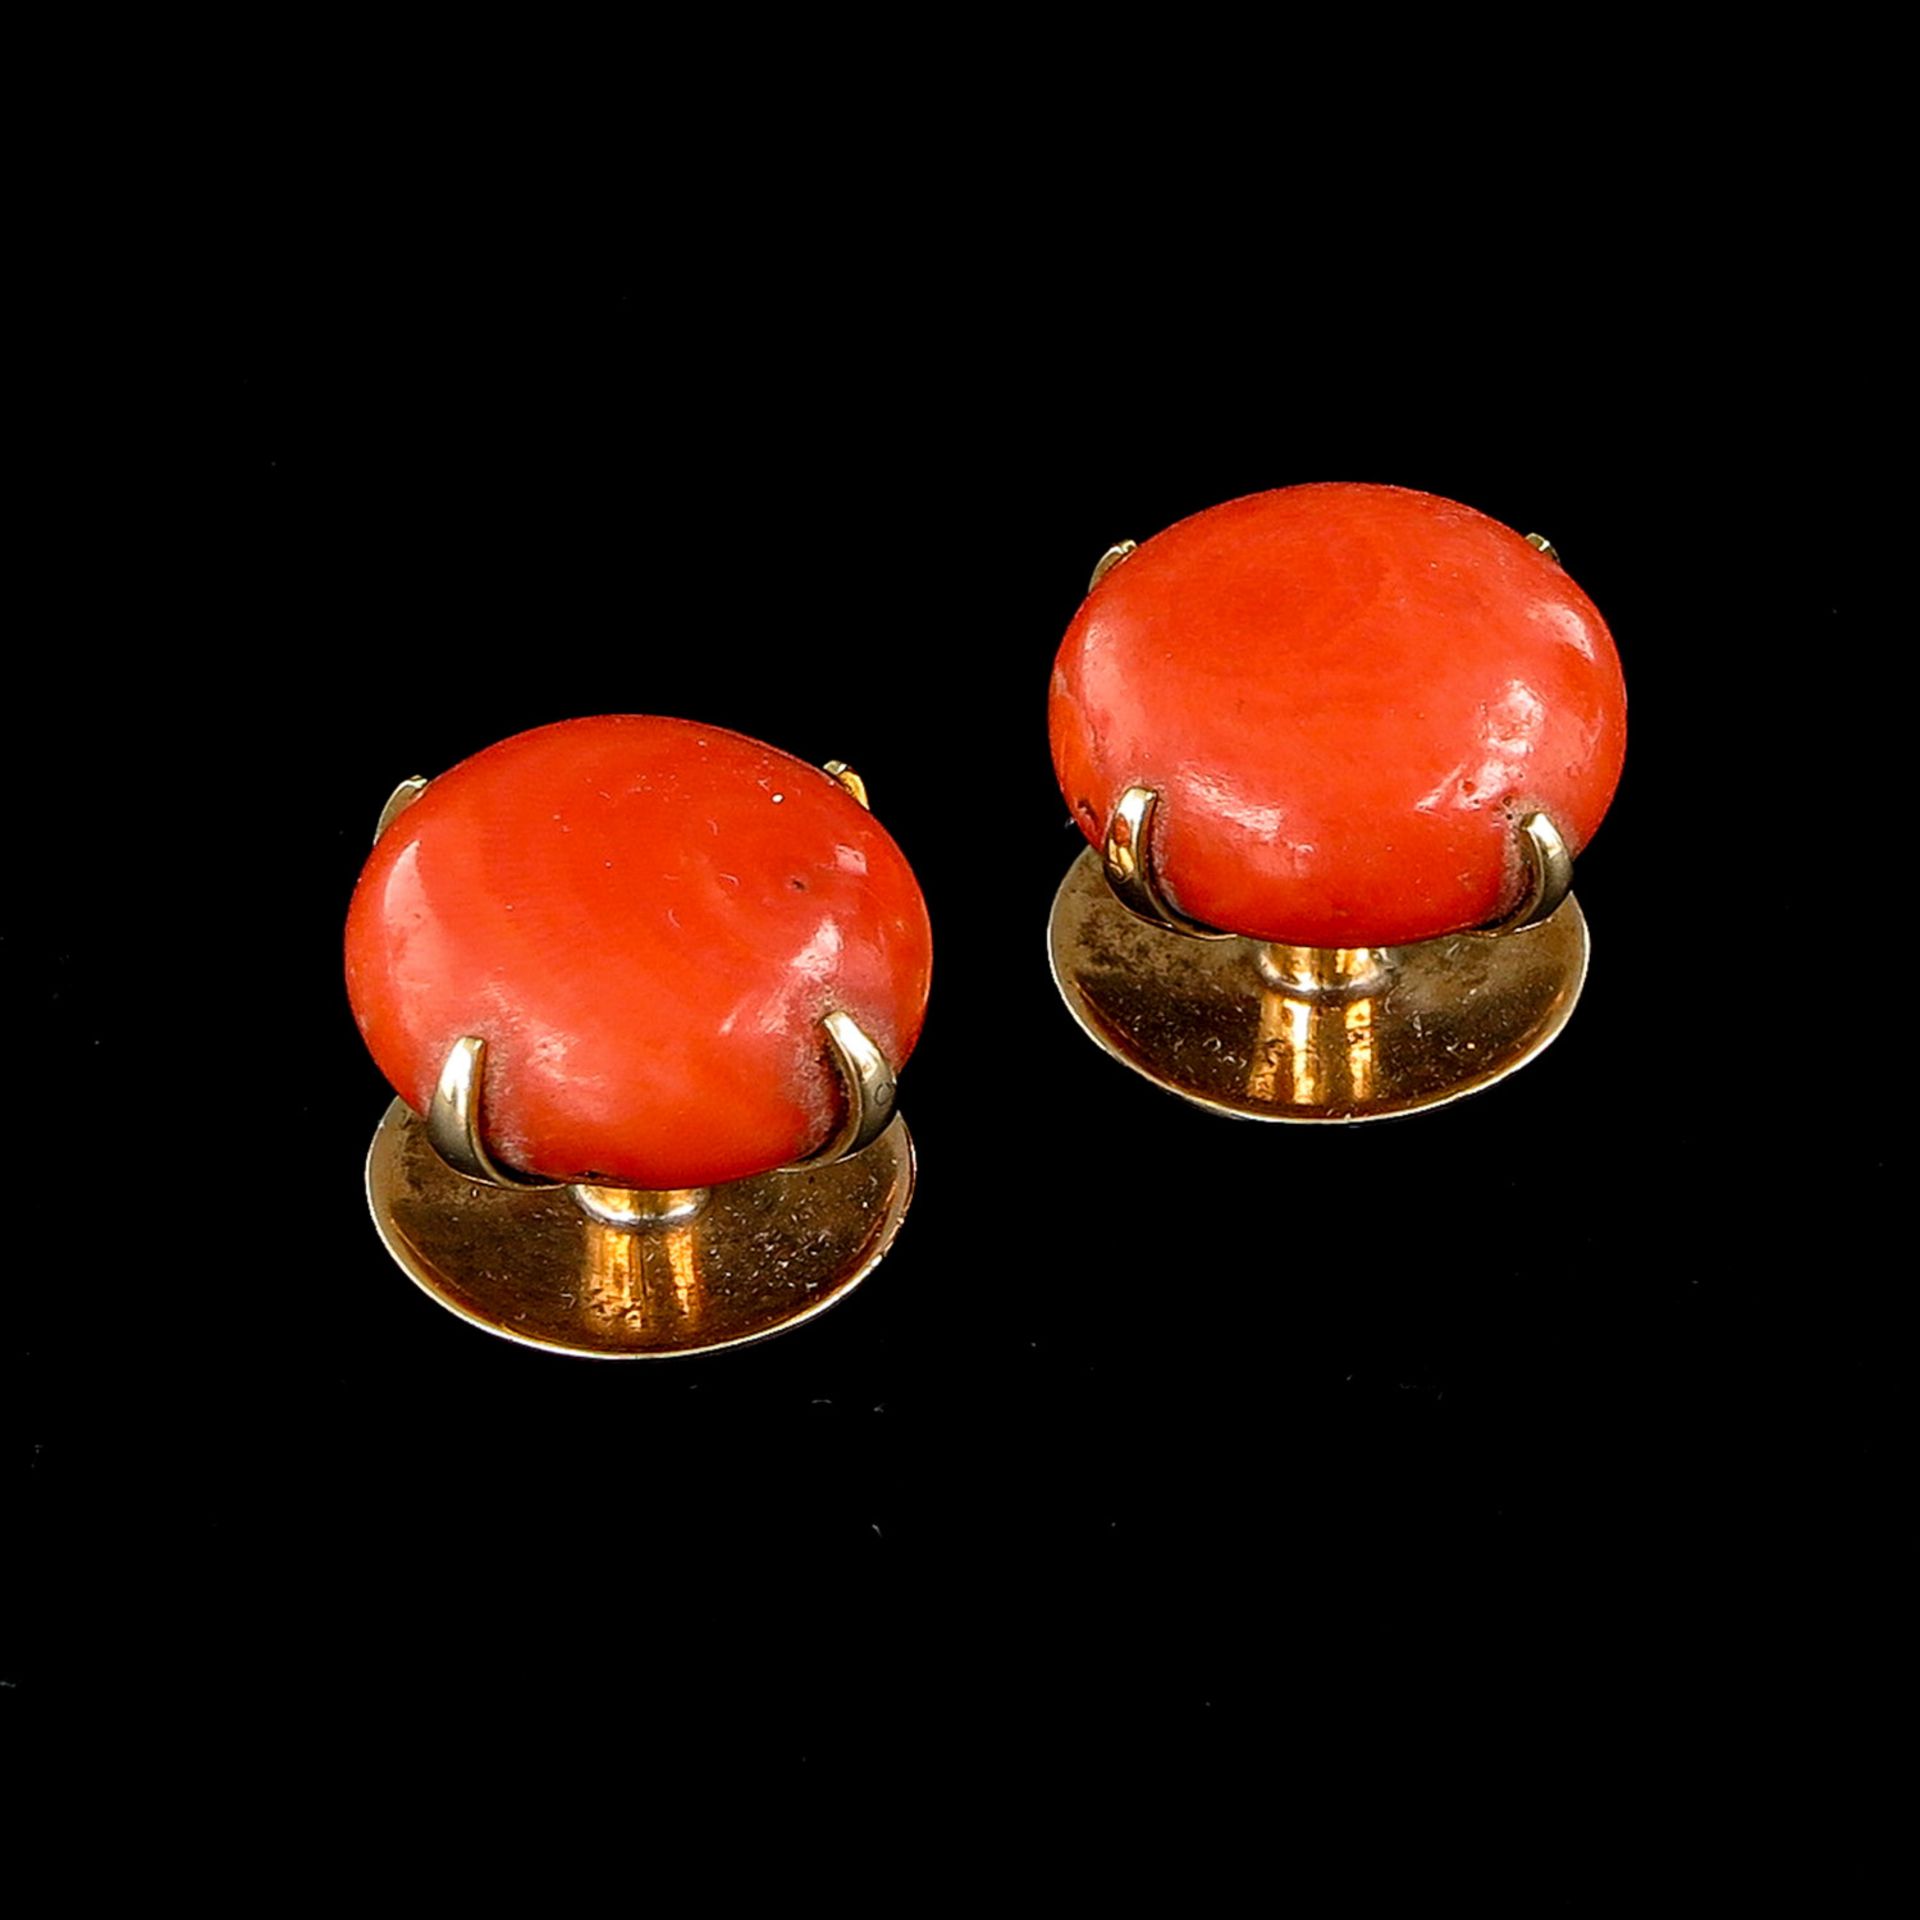 A Pair of 14KG Cuff Links with Red Coral